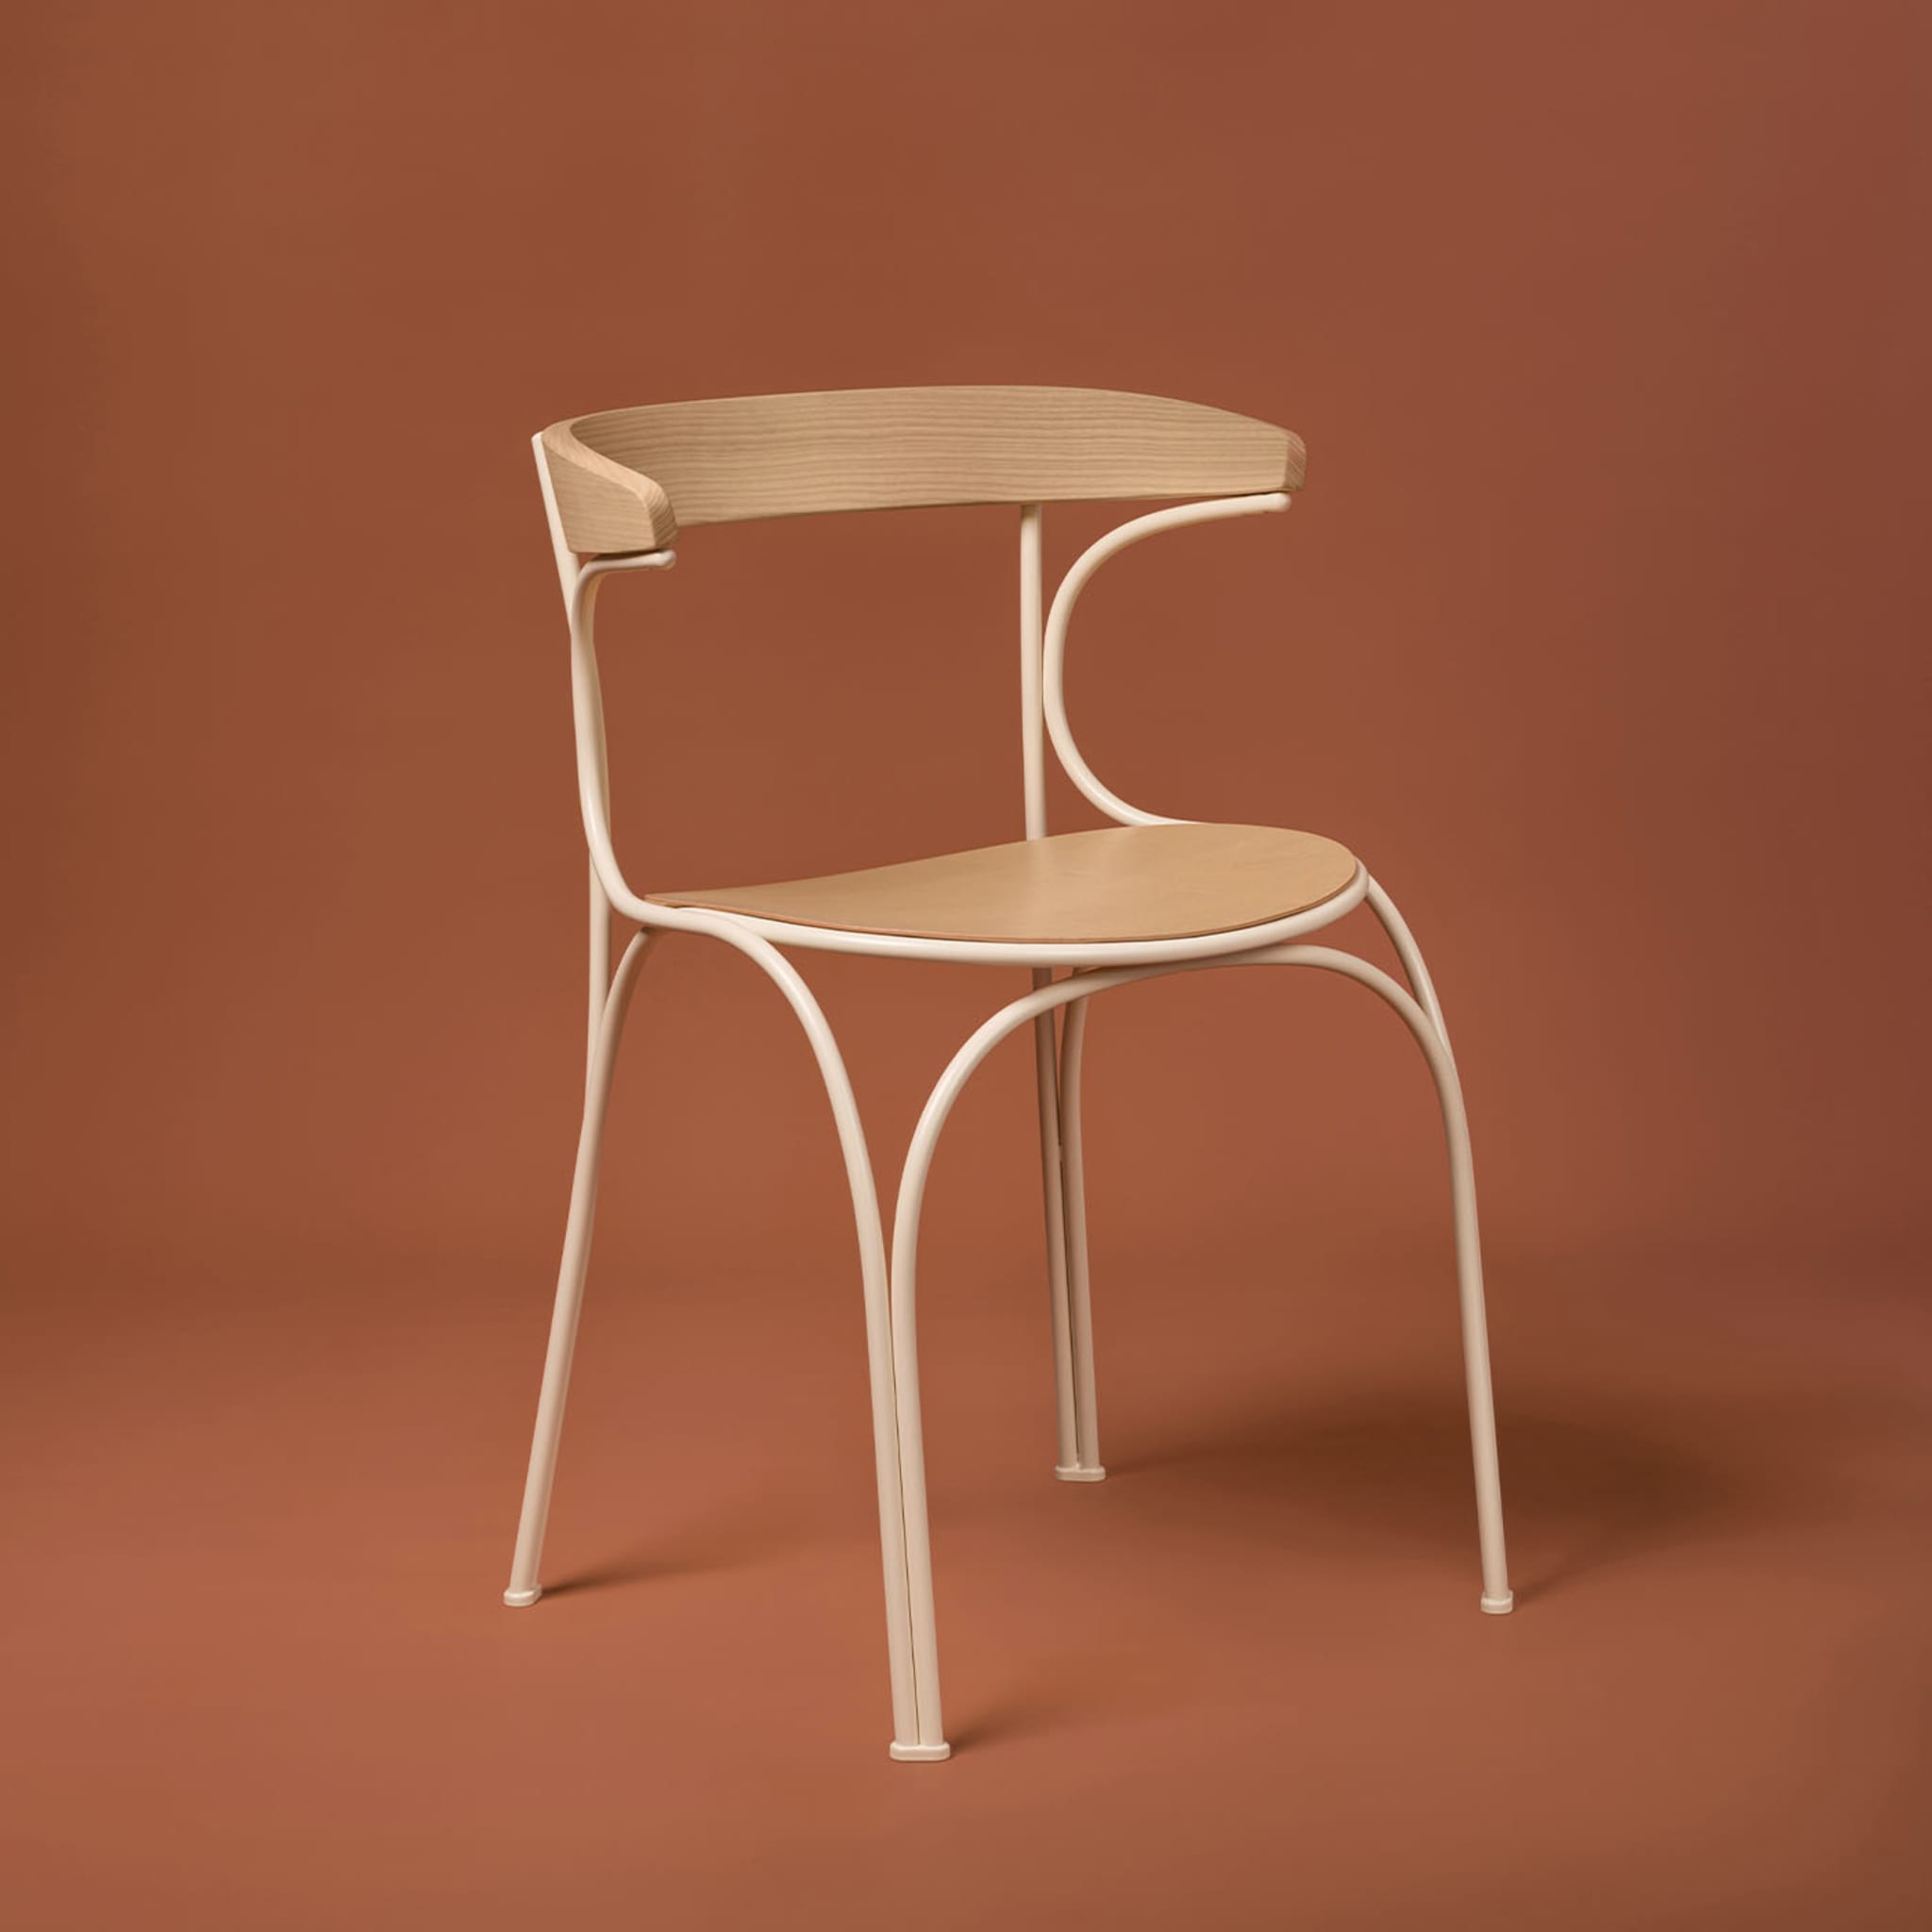 Ample Natural Chair by Nichetto Studio - Alternative view 5